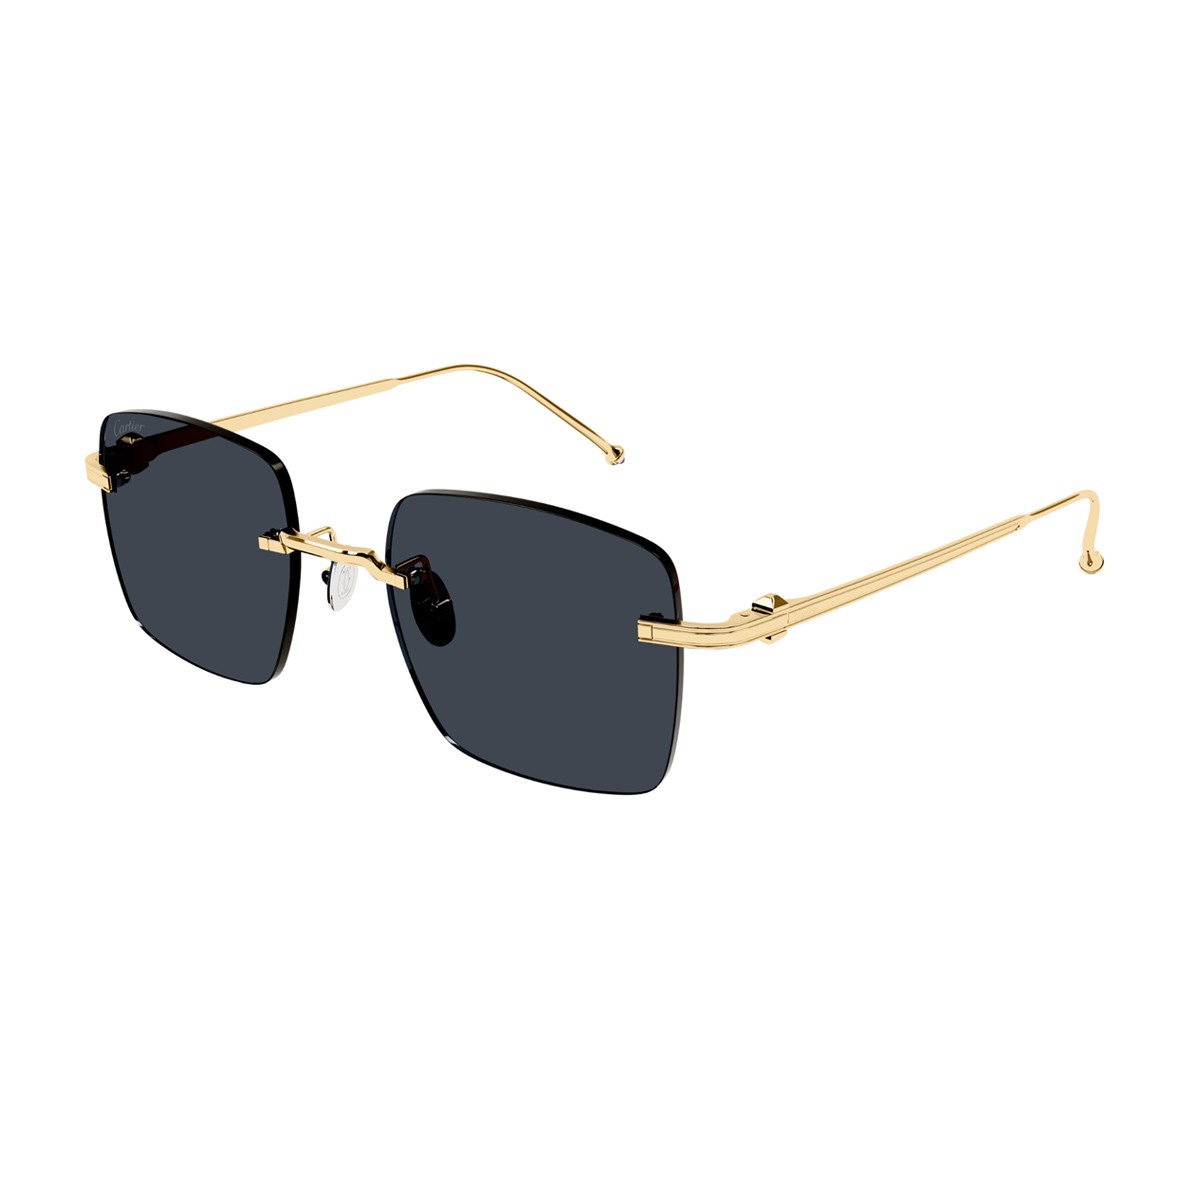 Cartier sunglasses and eyewear | Latest collections on OtticaLucciola